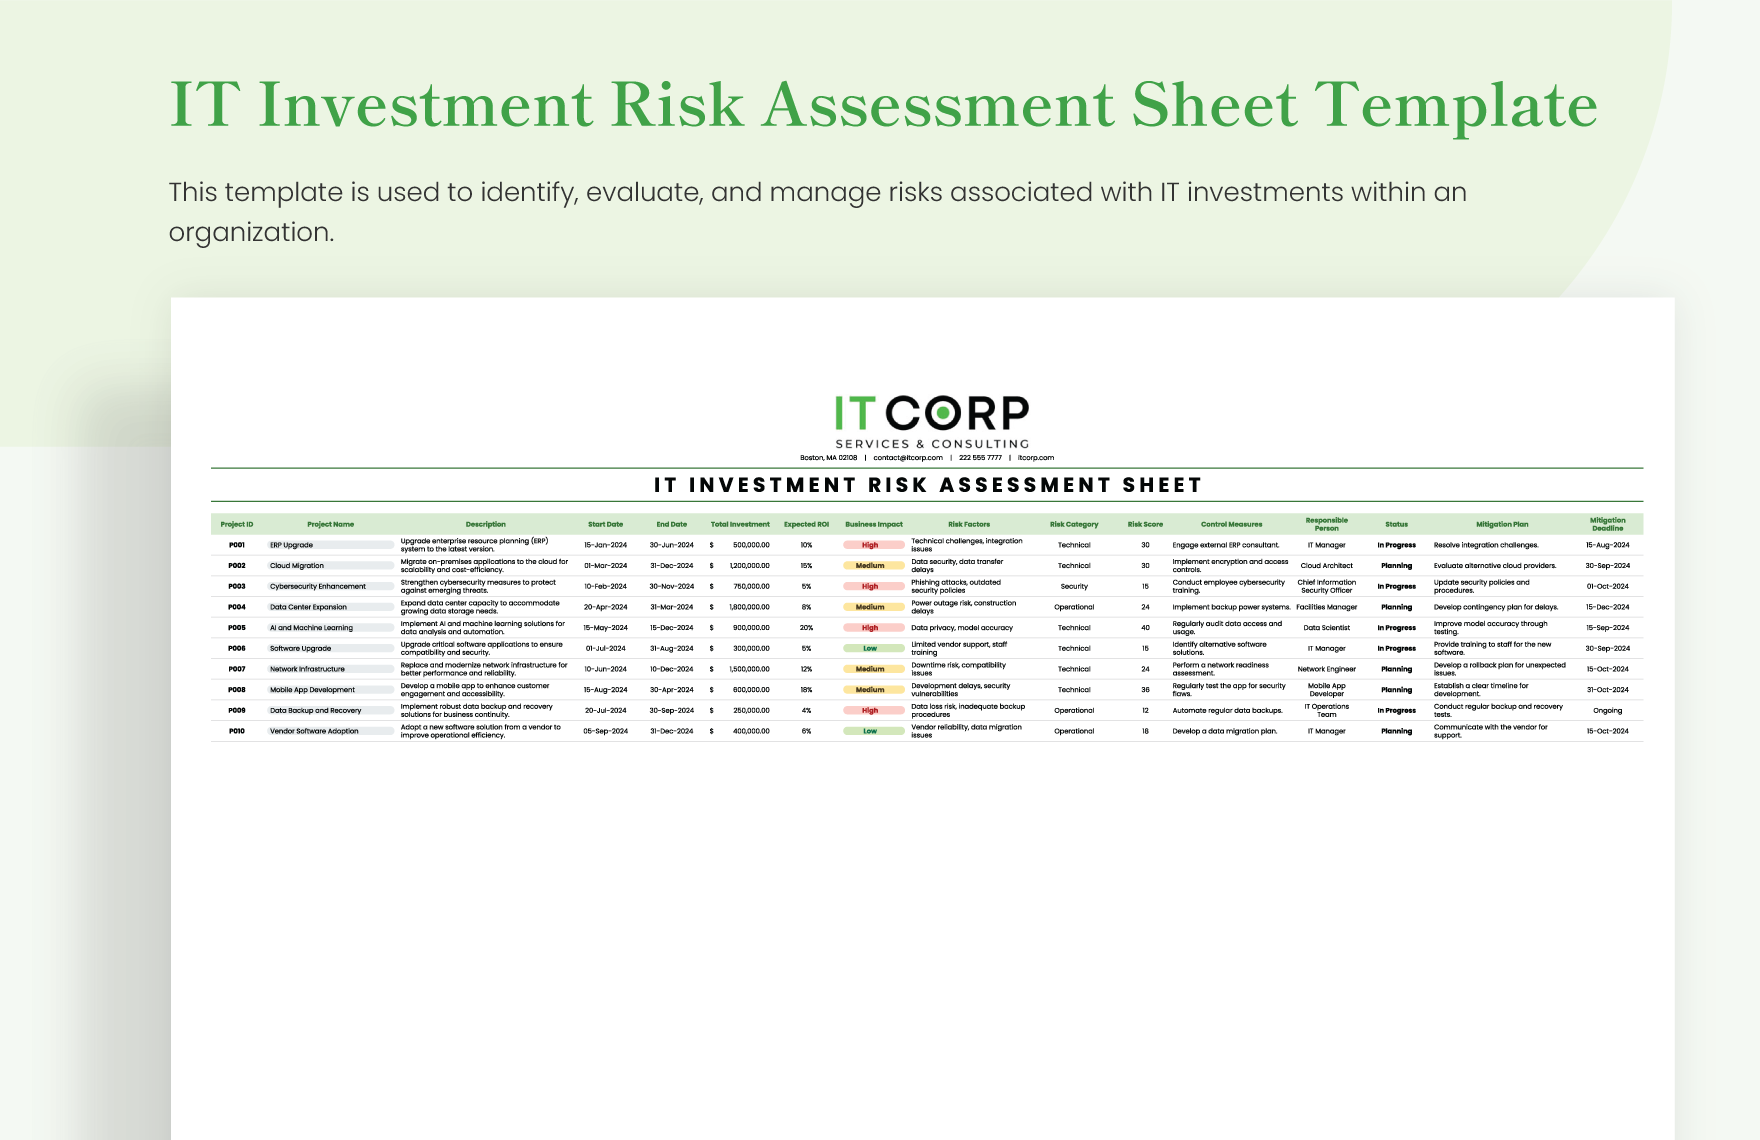 IT Investment Policy Statement Sheet Template in Excel, Google Sheets